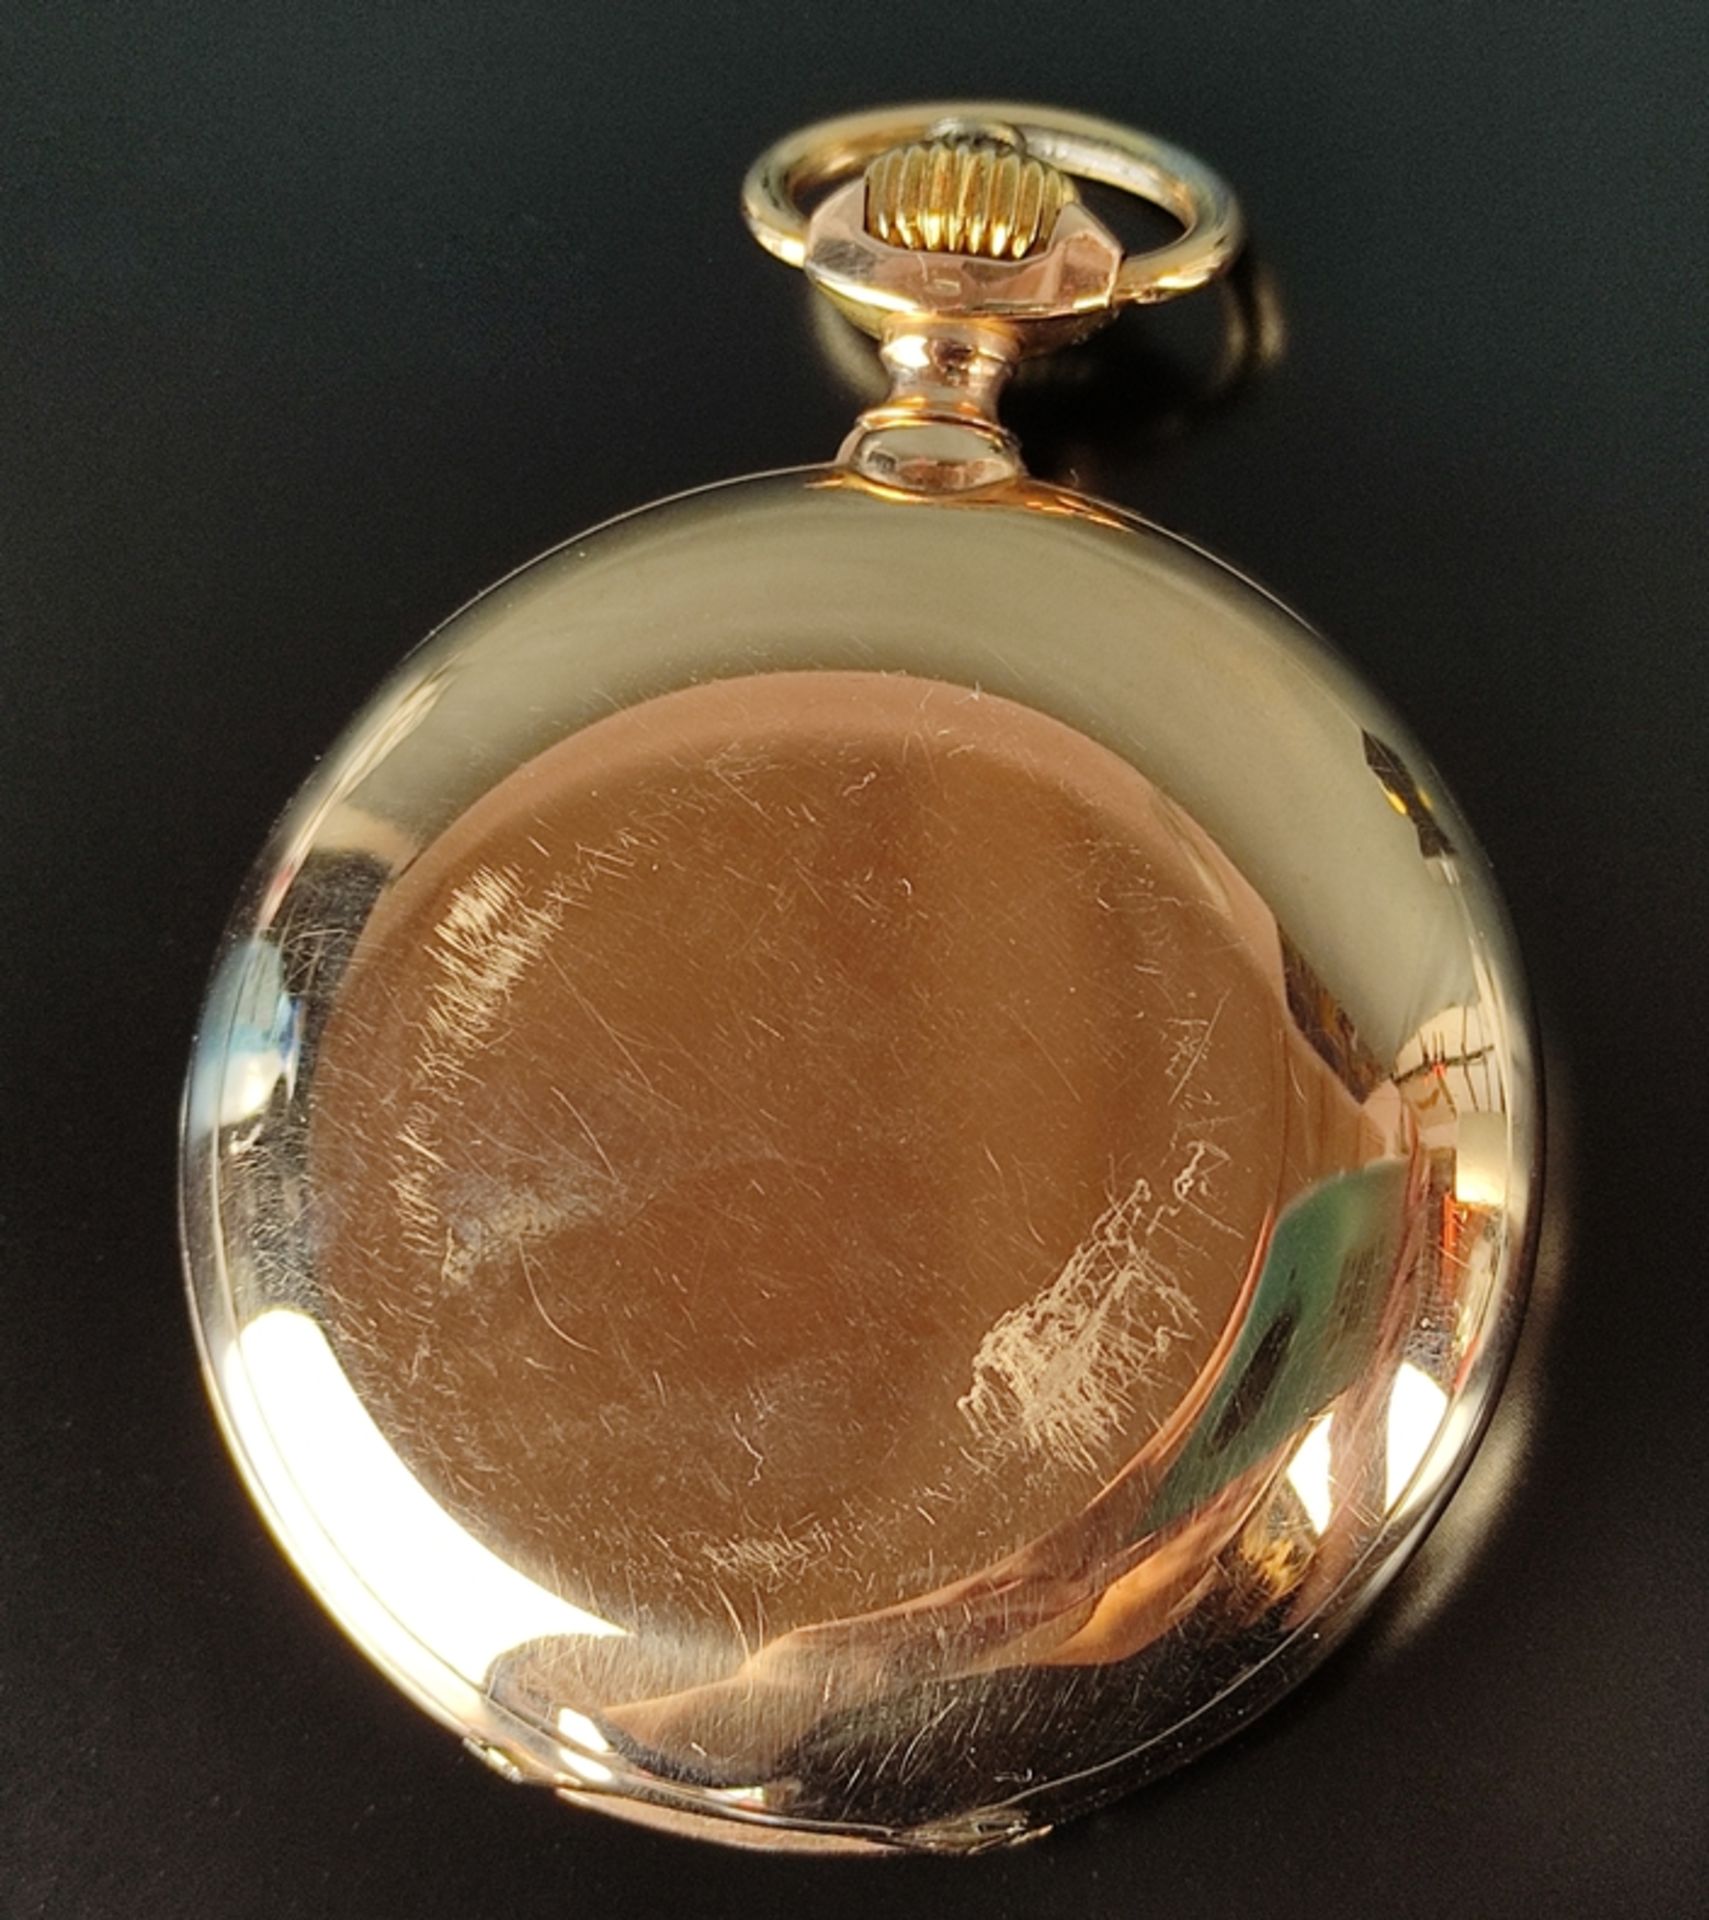 Savonette, pocket watch, spring cap, Systeme Glashütte, round dial with Arabic numerals, small seco - Image 6 of 7